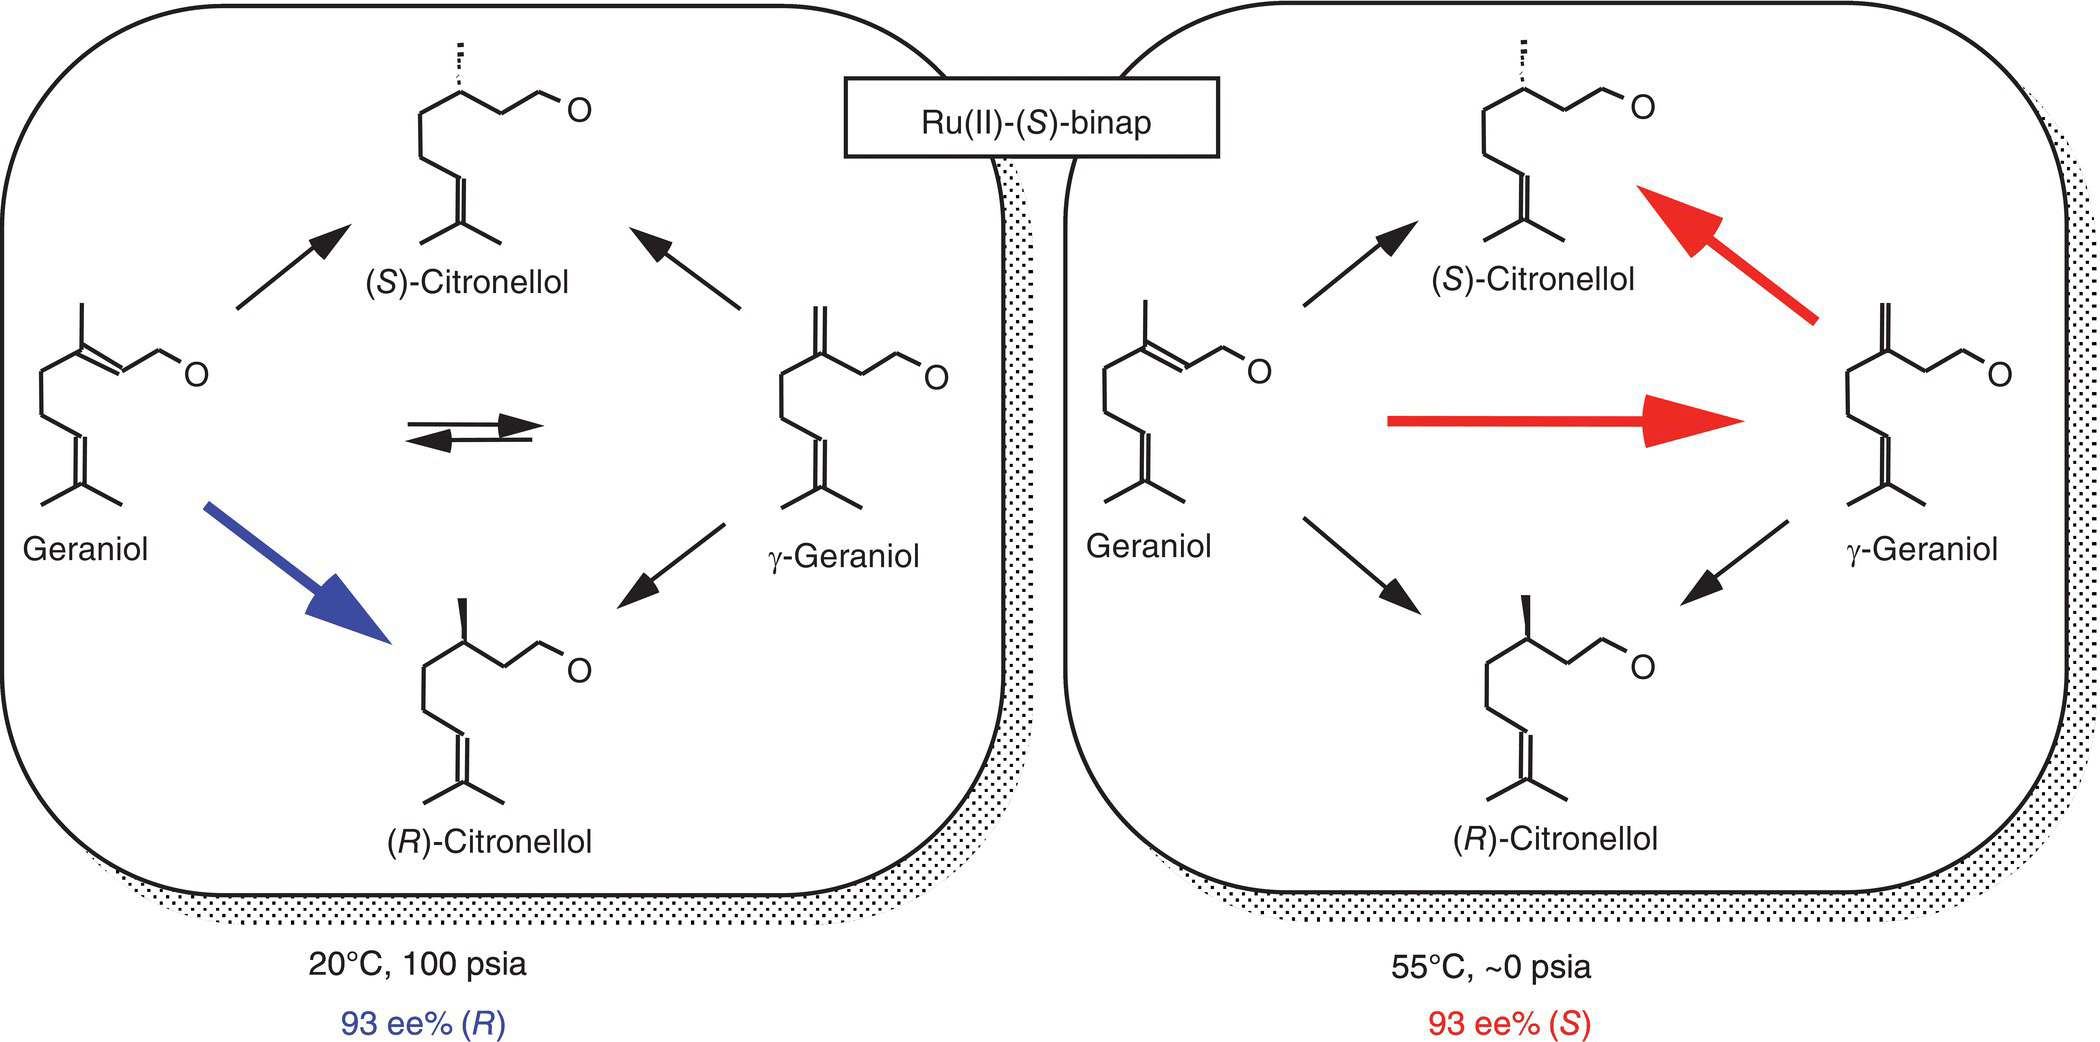 Schematic of the striking dependence of enantioselectivity in the asymmetric hydrogenation of geraniol, depicted by 2 panels each having structures of geraniol, (S)-citronellol, etc. that are linked by various arrows.